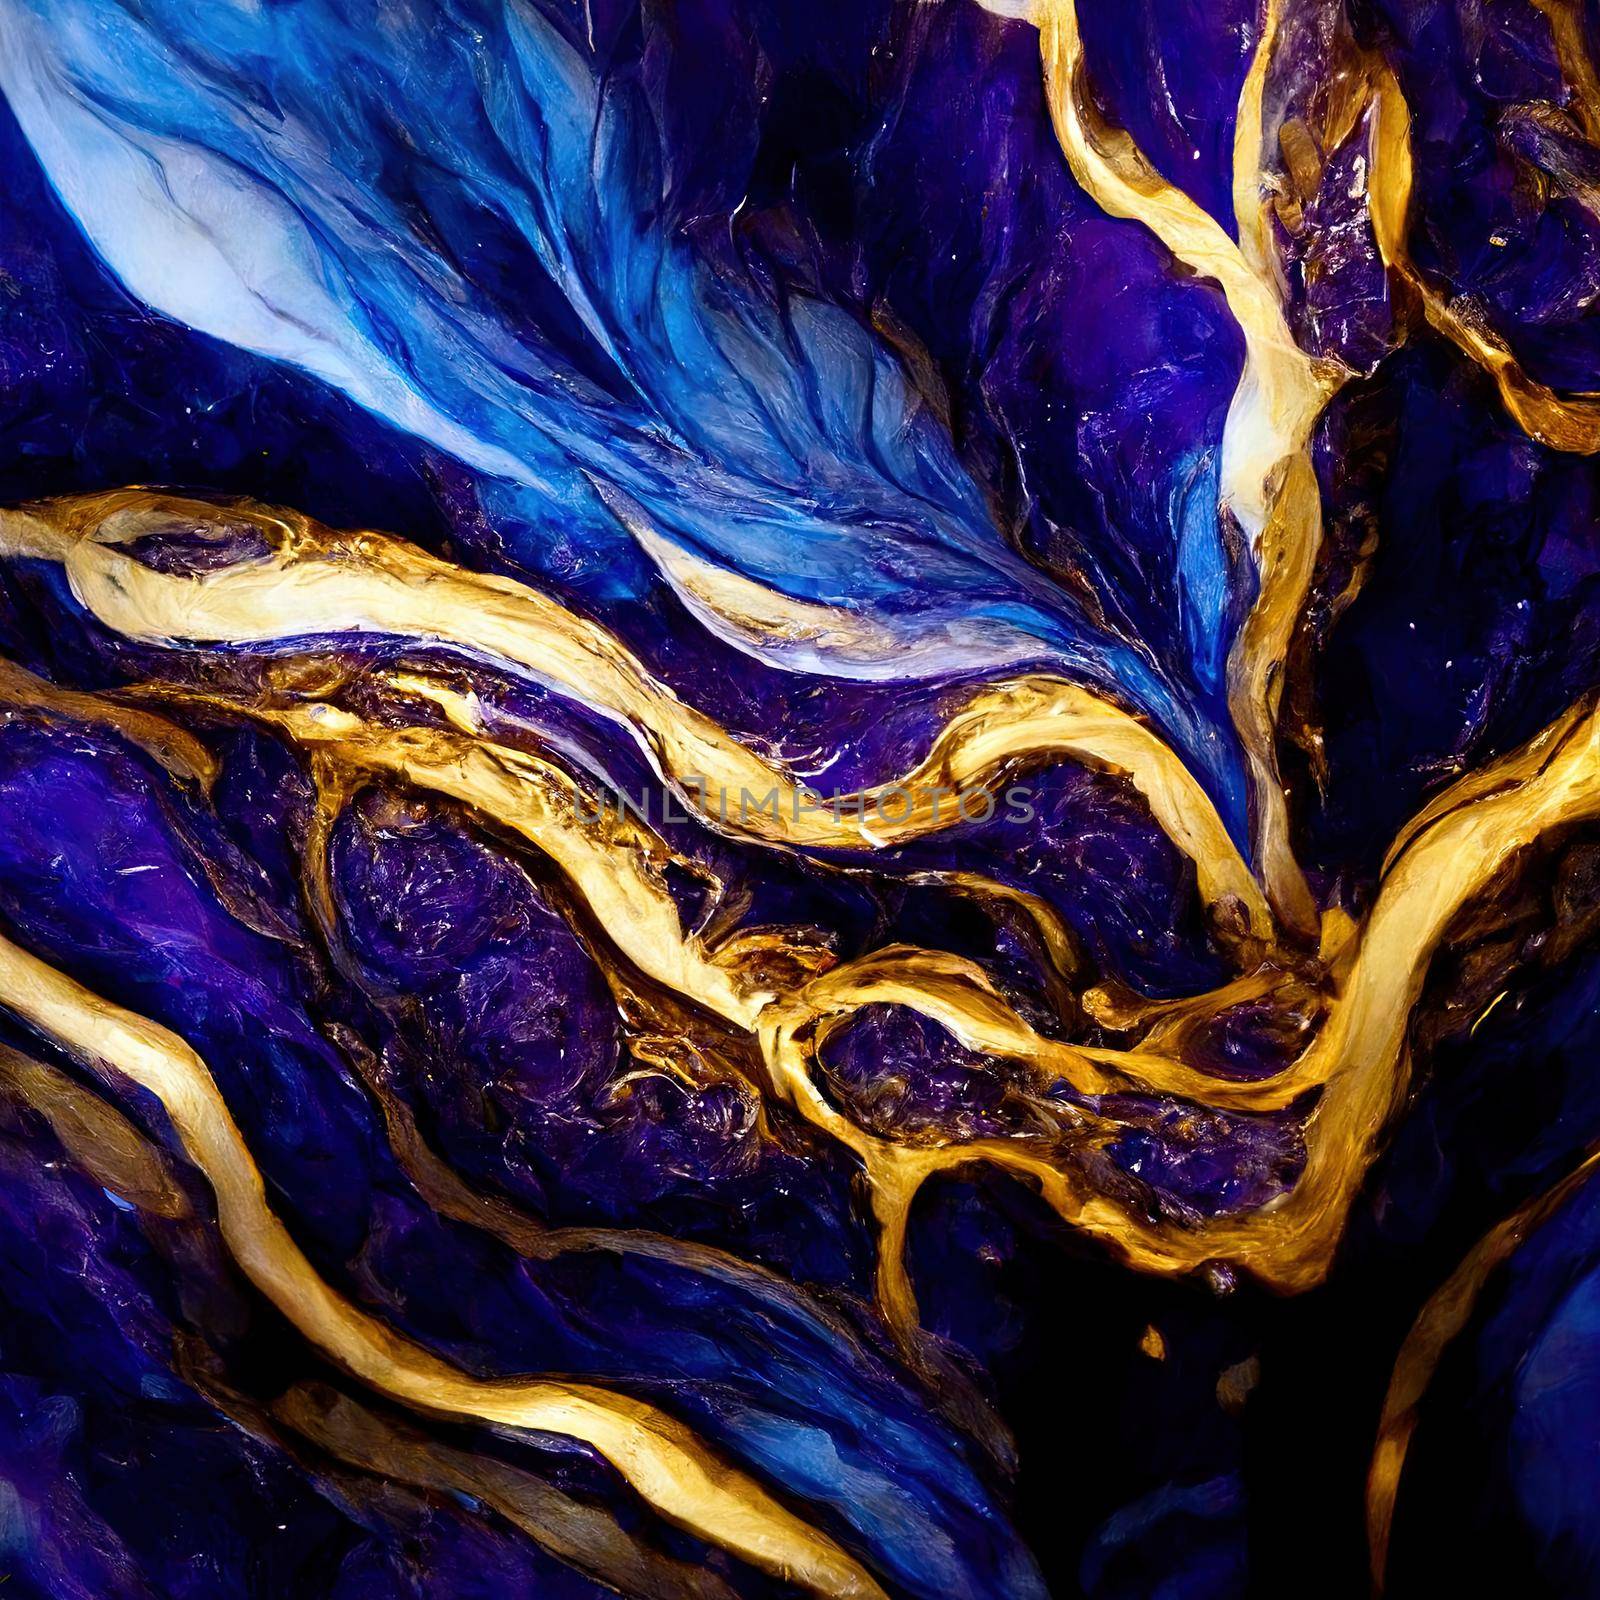 Luxury abstract fluid art painting mixture of blue and purple paints by 2ragon